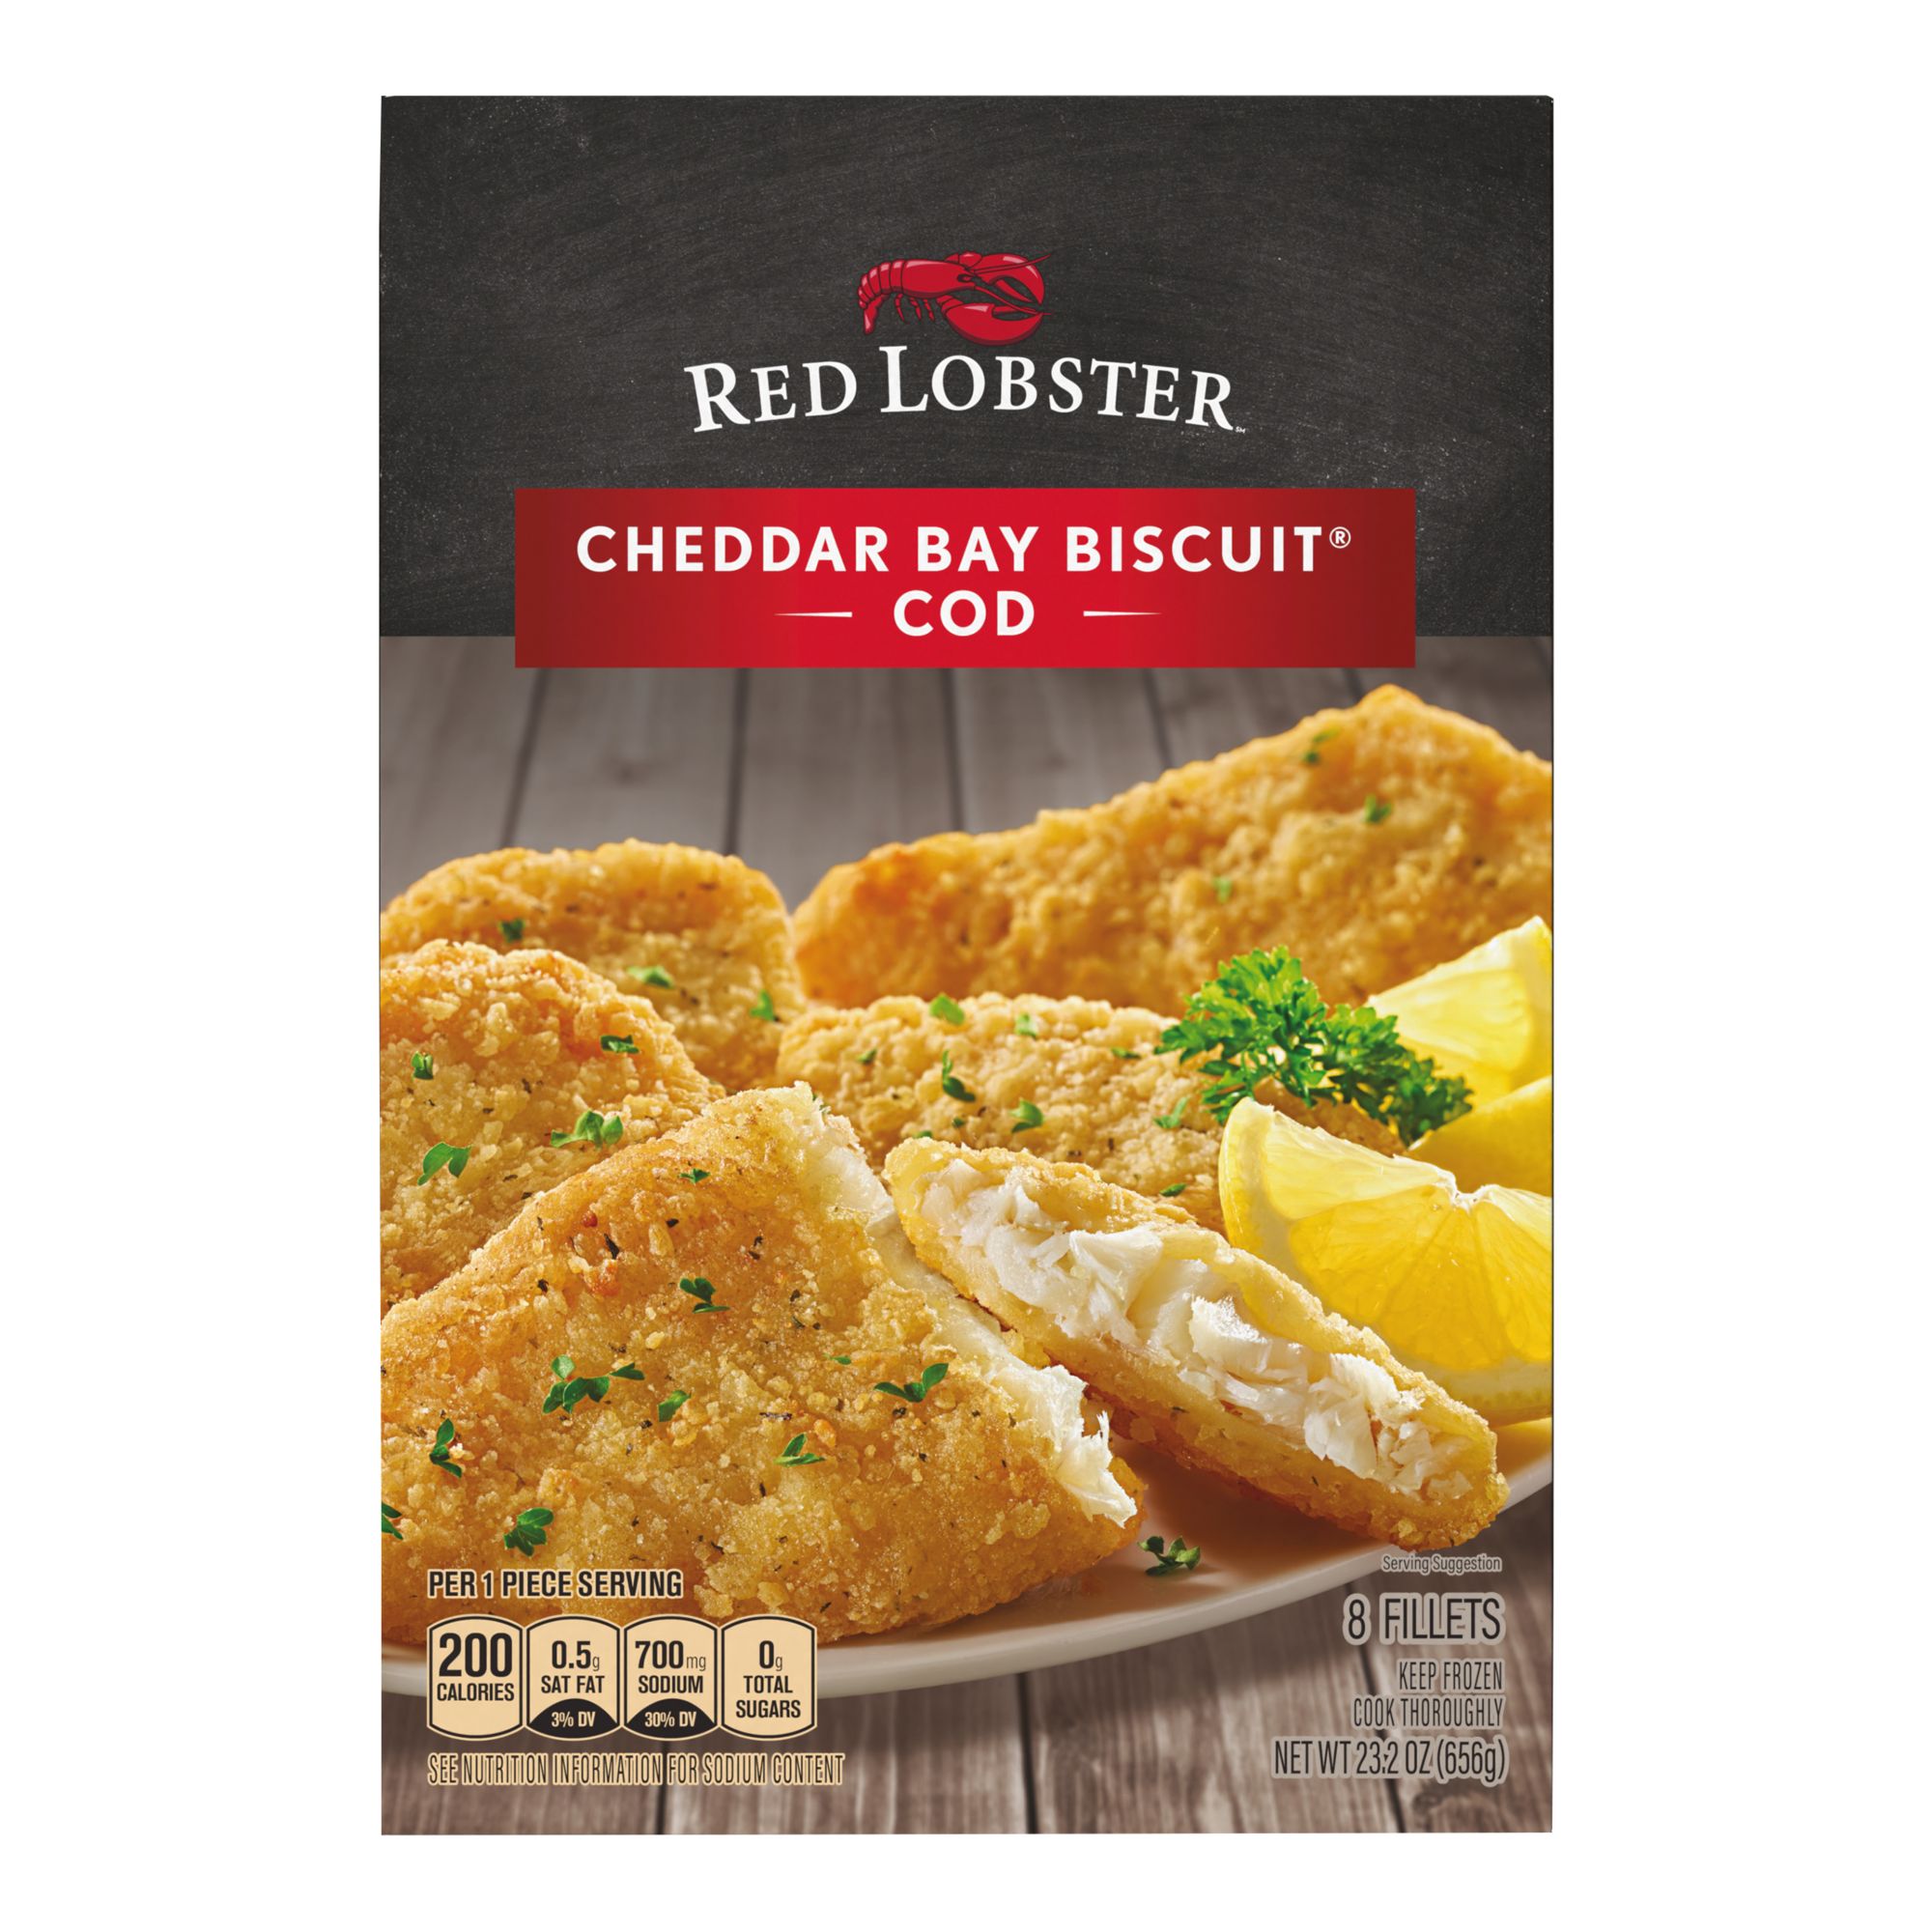 Red Lobster Cheddar Biscuit Mix (45.44 Ounce)